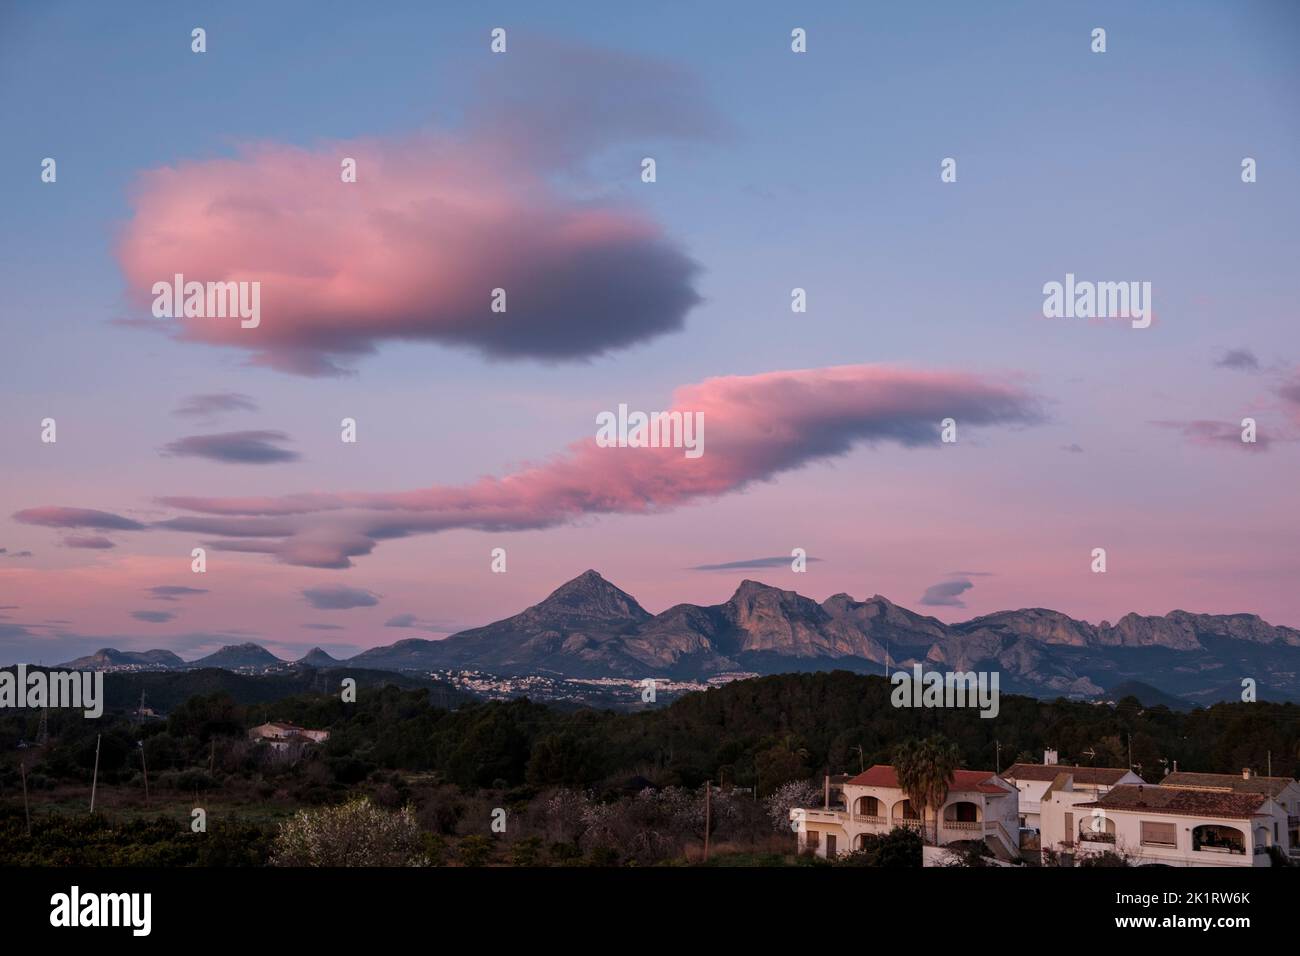 Morning cloud formation over the Puig Campana mountain and the Sierra Aitana mountain range with the villages of La Nucia and Polop near Altea, Alicante province, Spain, in January 2020. Stock Photo